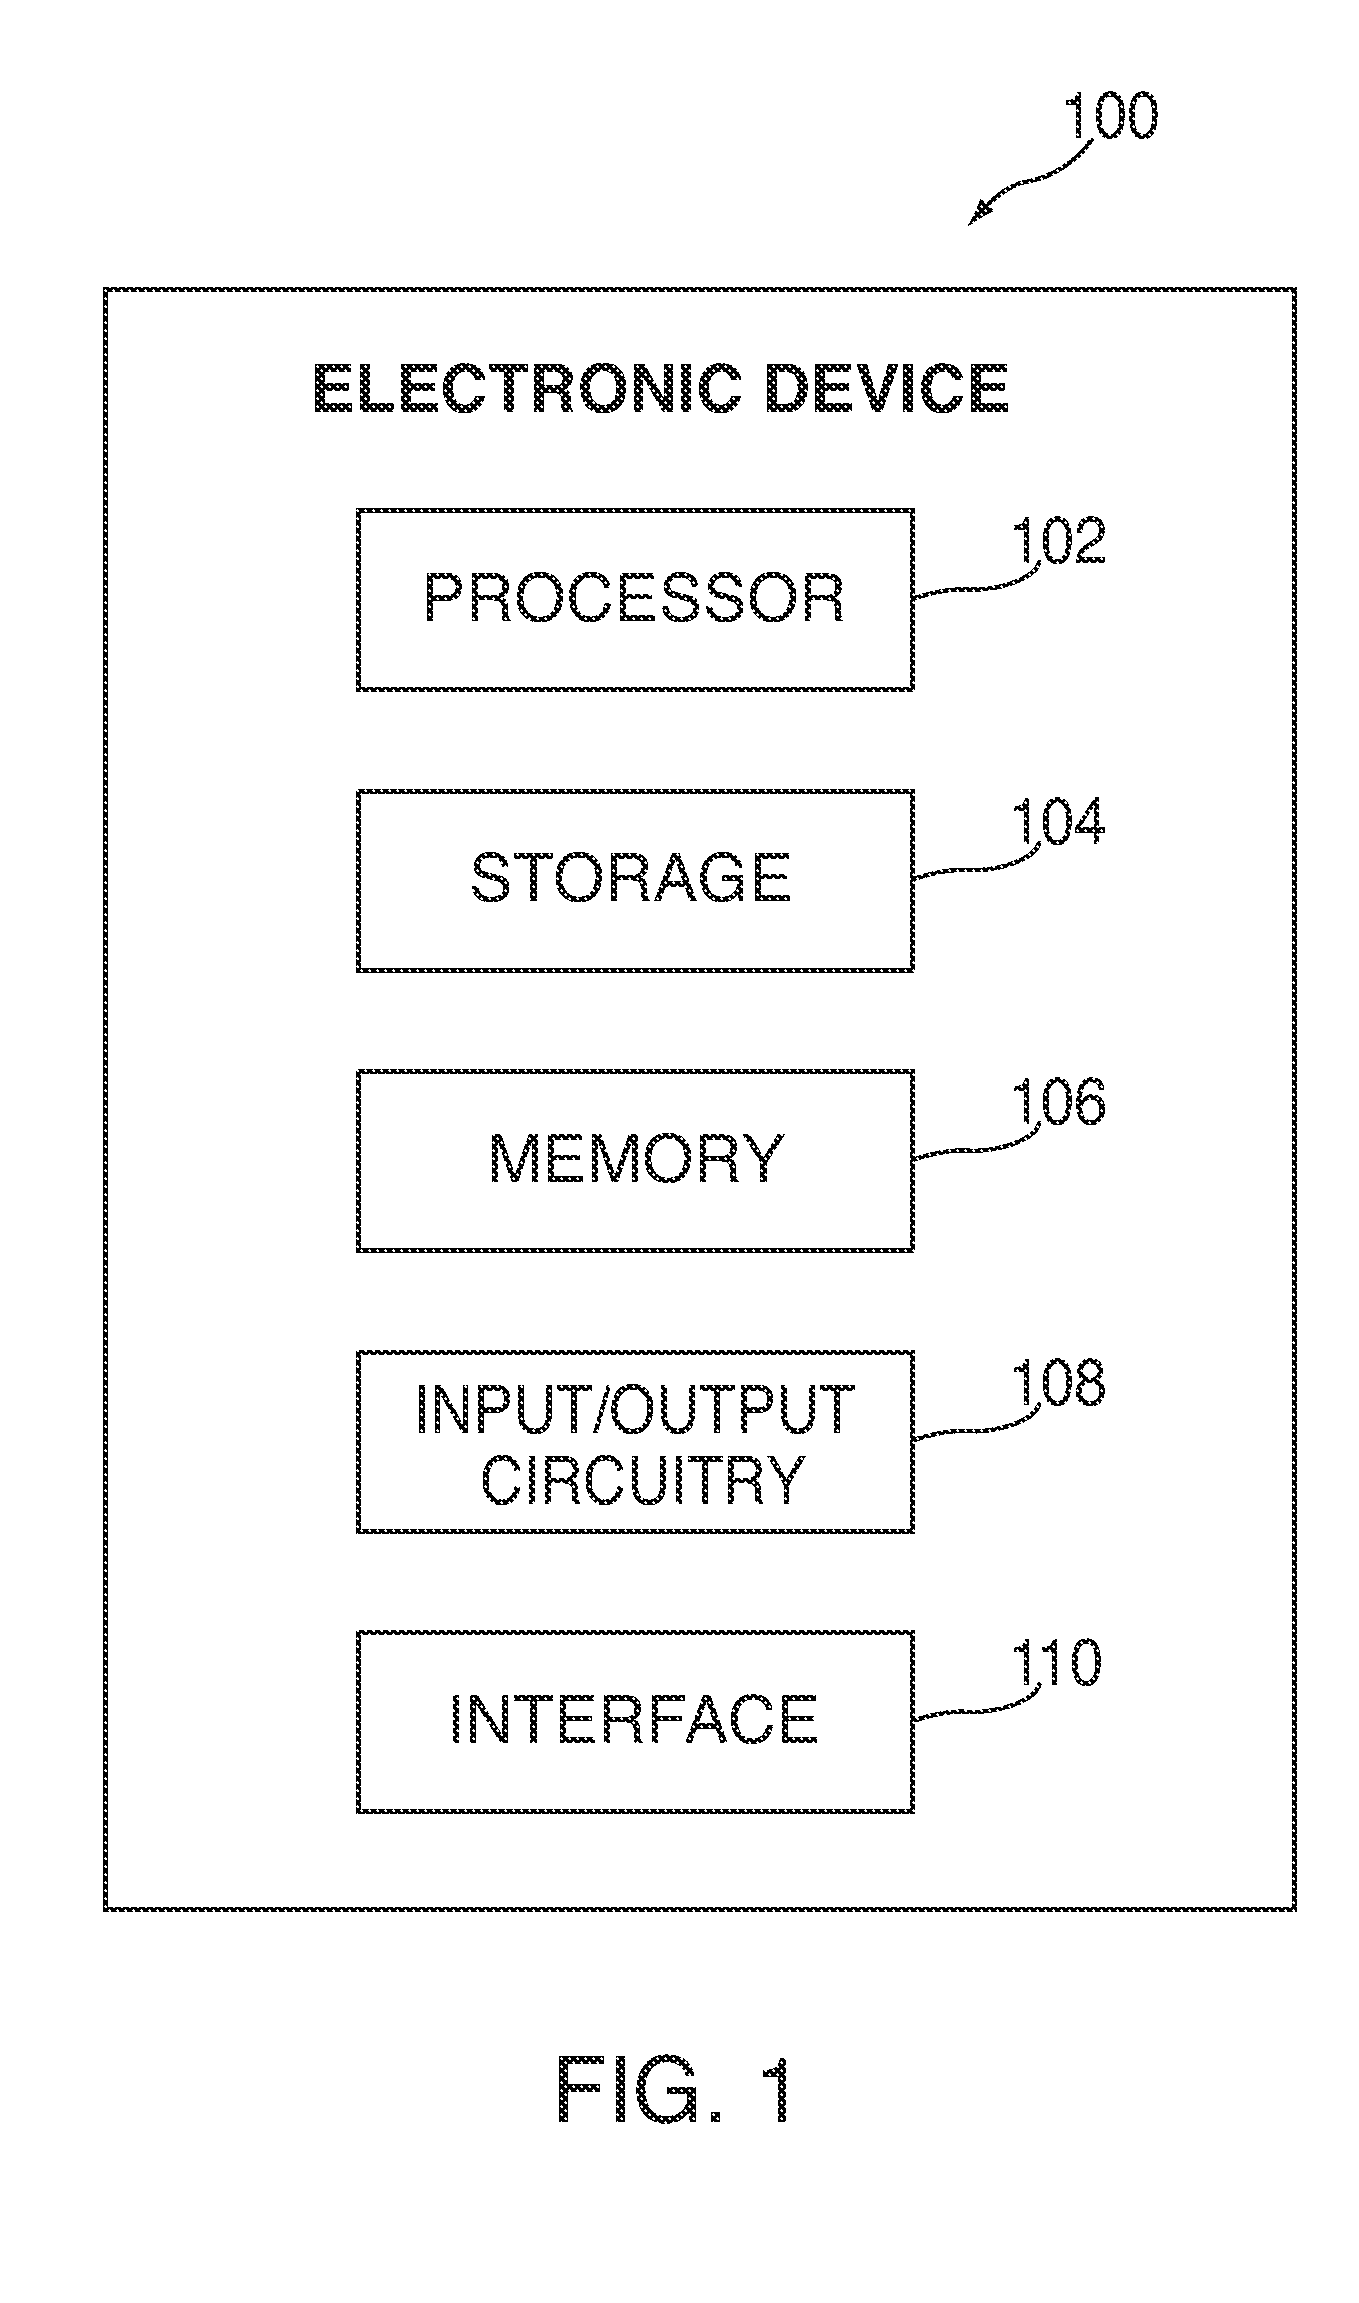 Magnet array for coupling and aligning an accessory to an electronic device